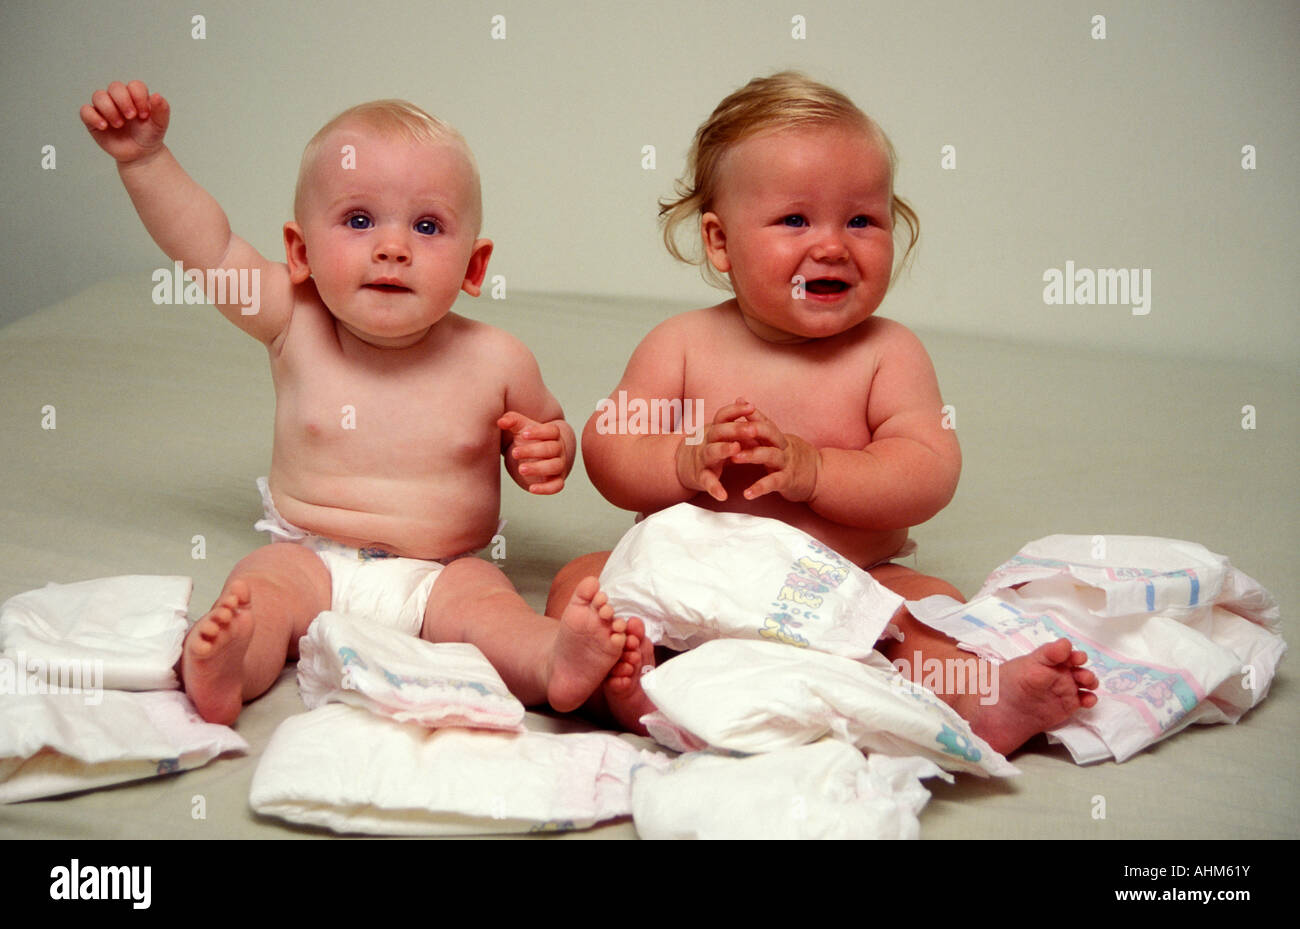 2 little babies sitting together surrounded by disposable nappies diapers Stock Photo